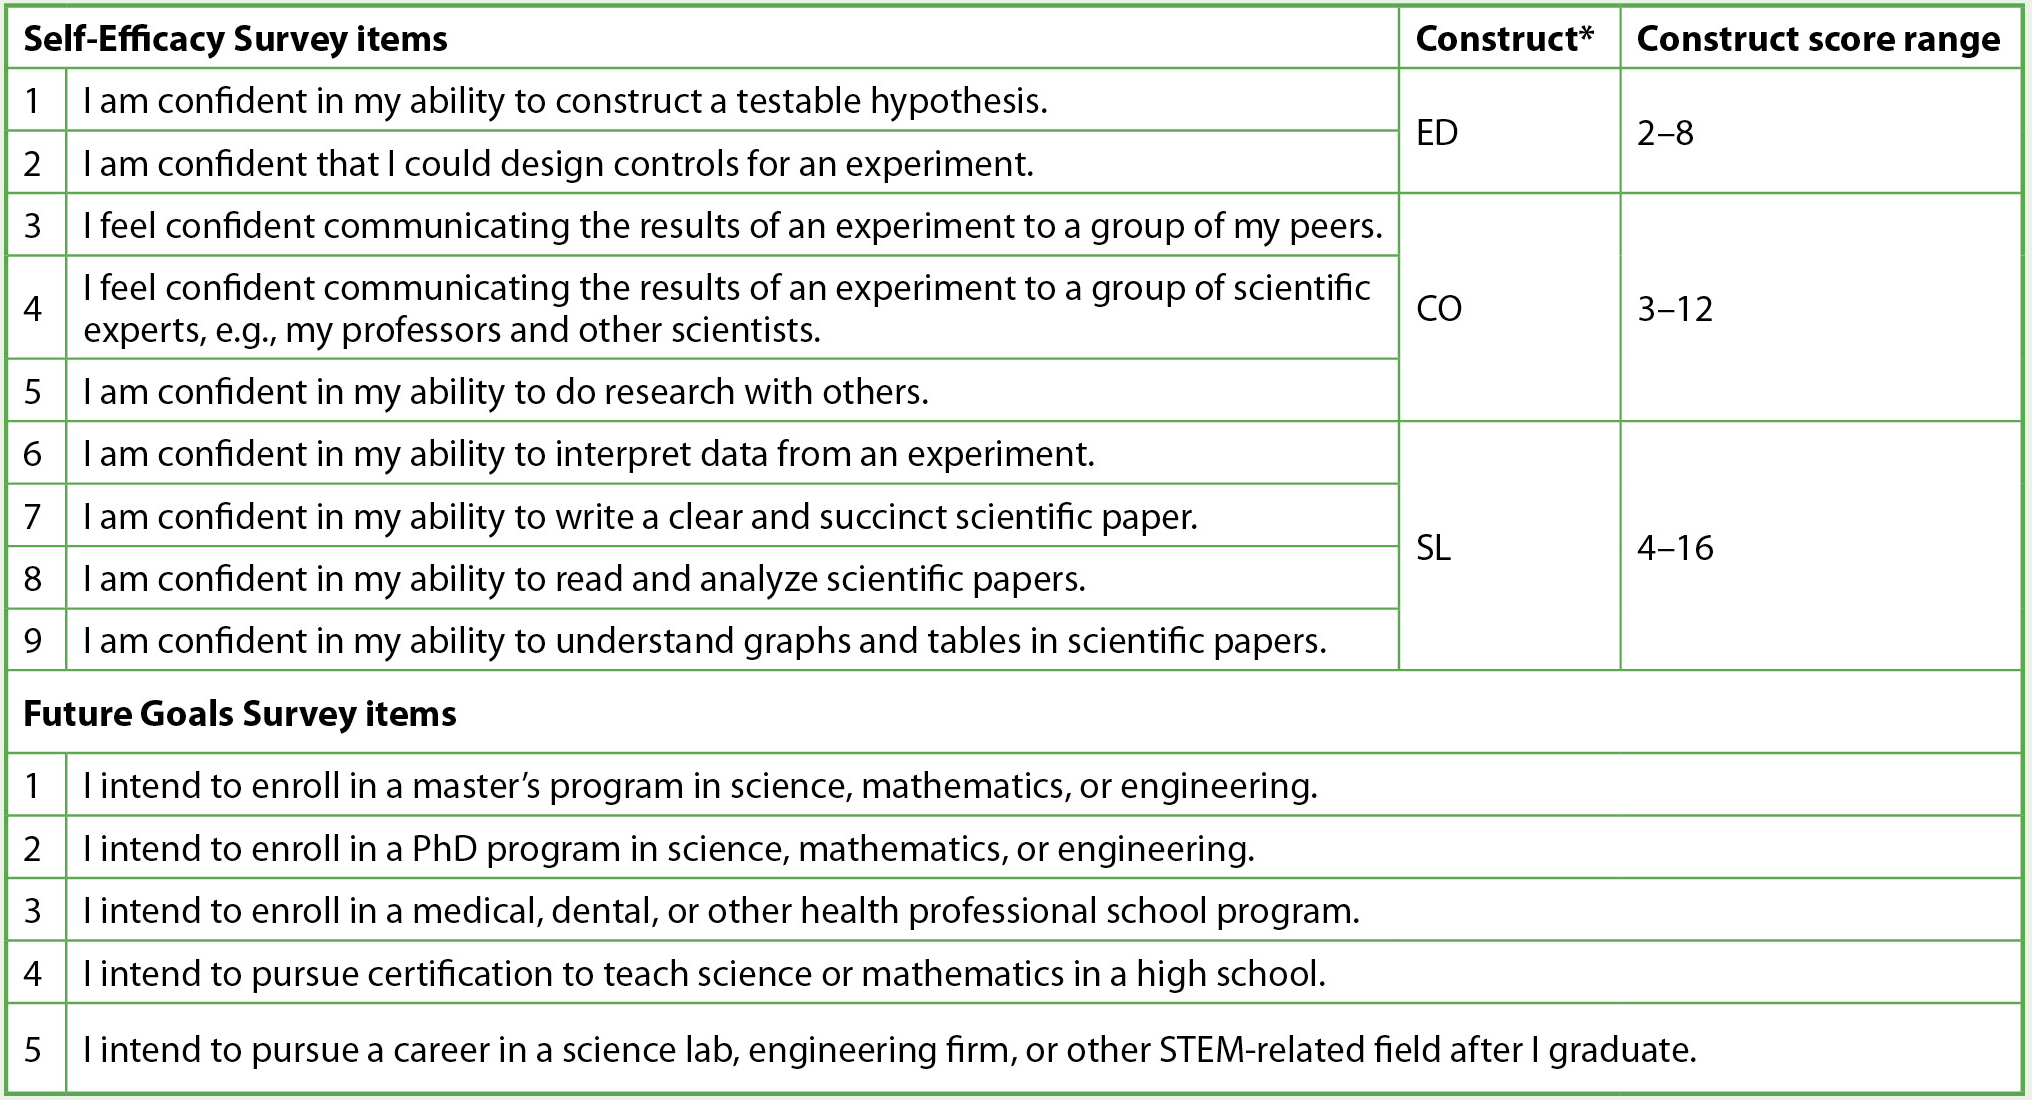 Items included on the Self-Efficacy Survey and the Future Goals Survey.  The SES included nine Likert-like items with the following choices: 1: Strongly Disagree, 2: Disagree, 3: Agree, and 4: Strongly Agree. Constructs were determined using exploratory factor analysis and construct scores were created by summing student responses within each construct. The Future Goals Survey included nine Likert-like items with the following choices: 1: Strongly Disagree, 2: Disagree, 3: Undecided, 4: Agree, and 5: Strong